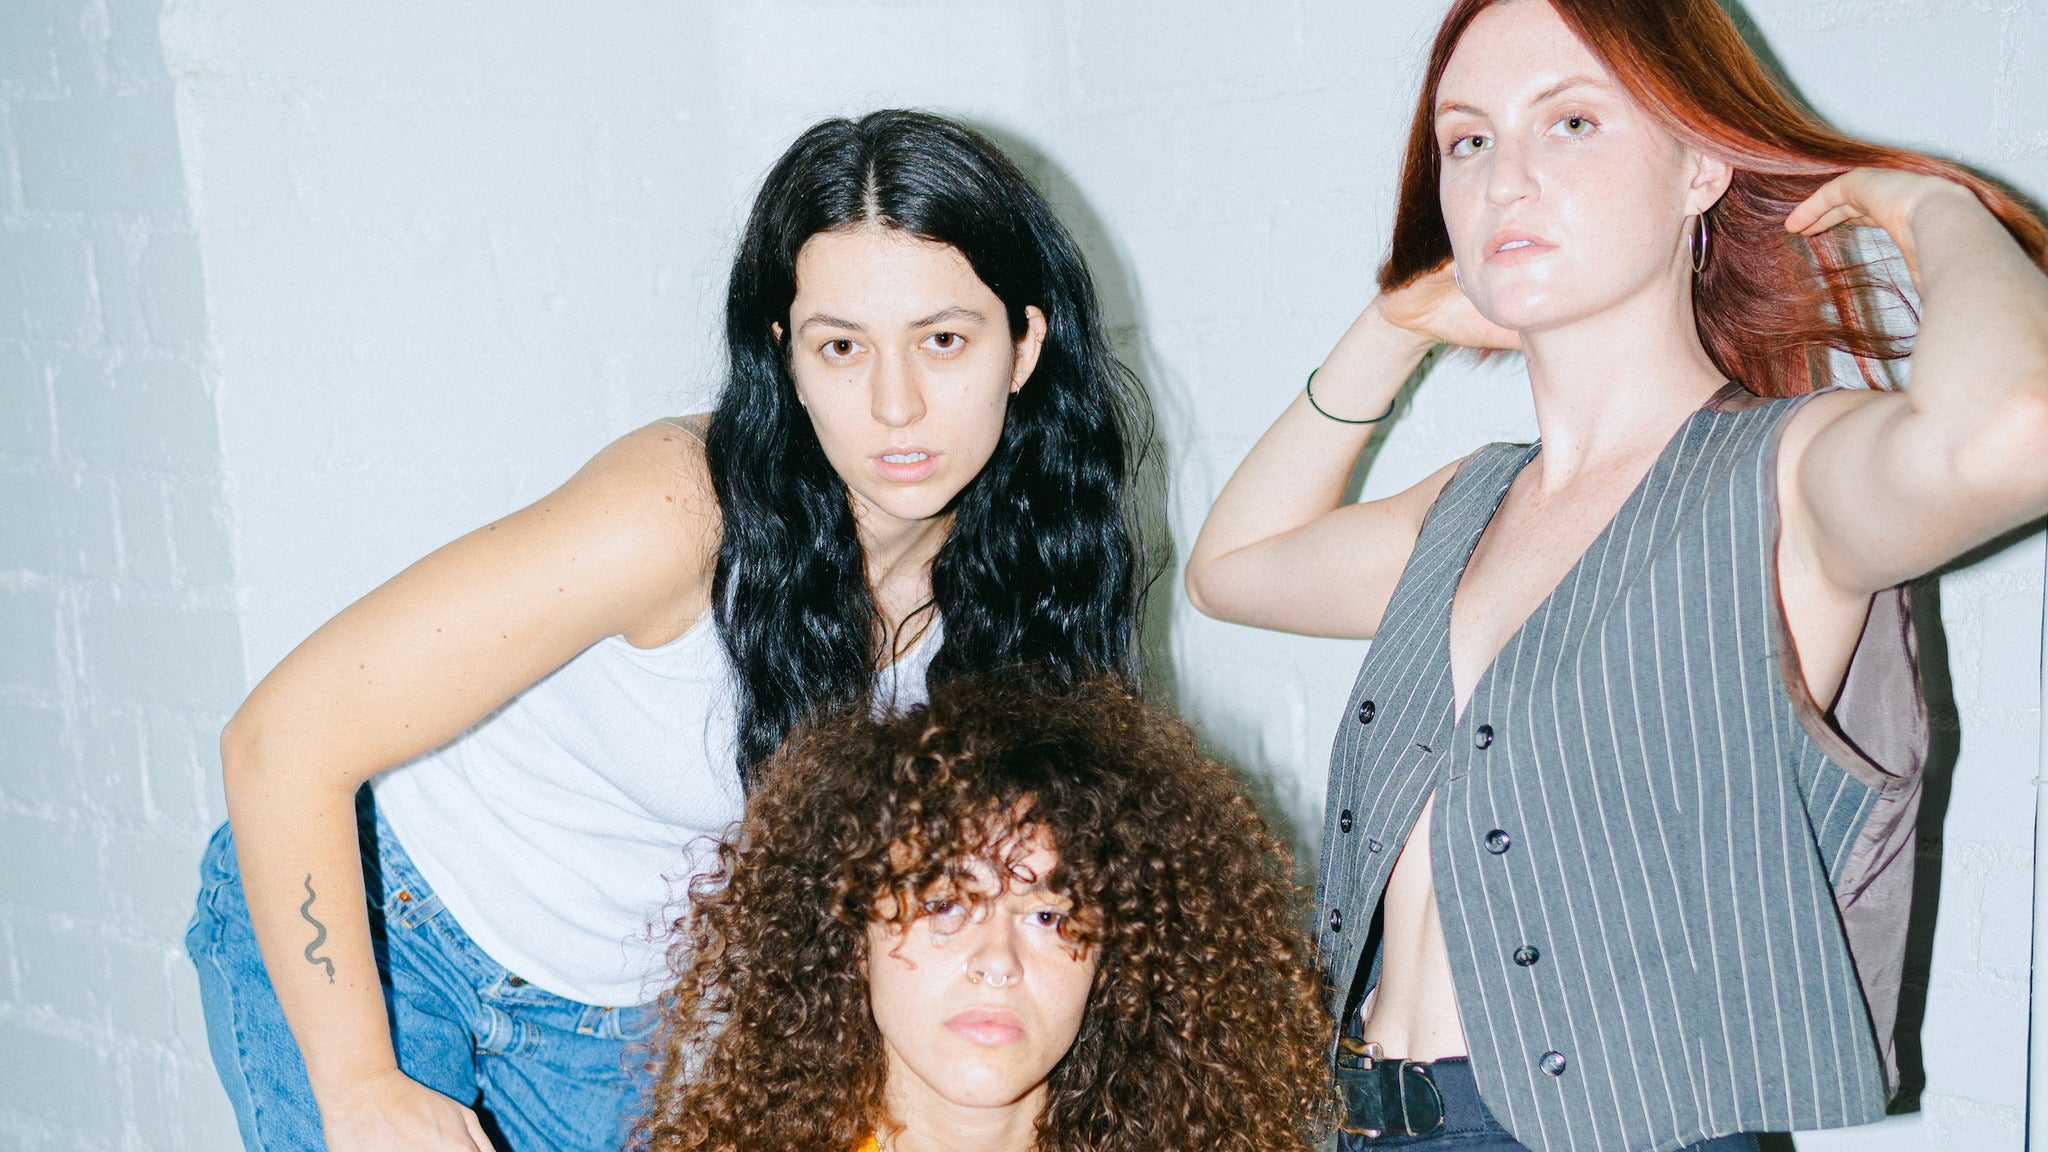 Image used with permission from Ticketmaster | MUNA tickets